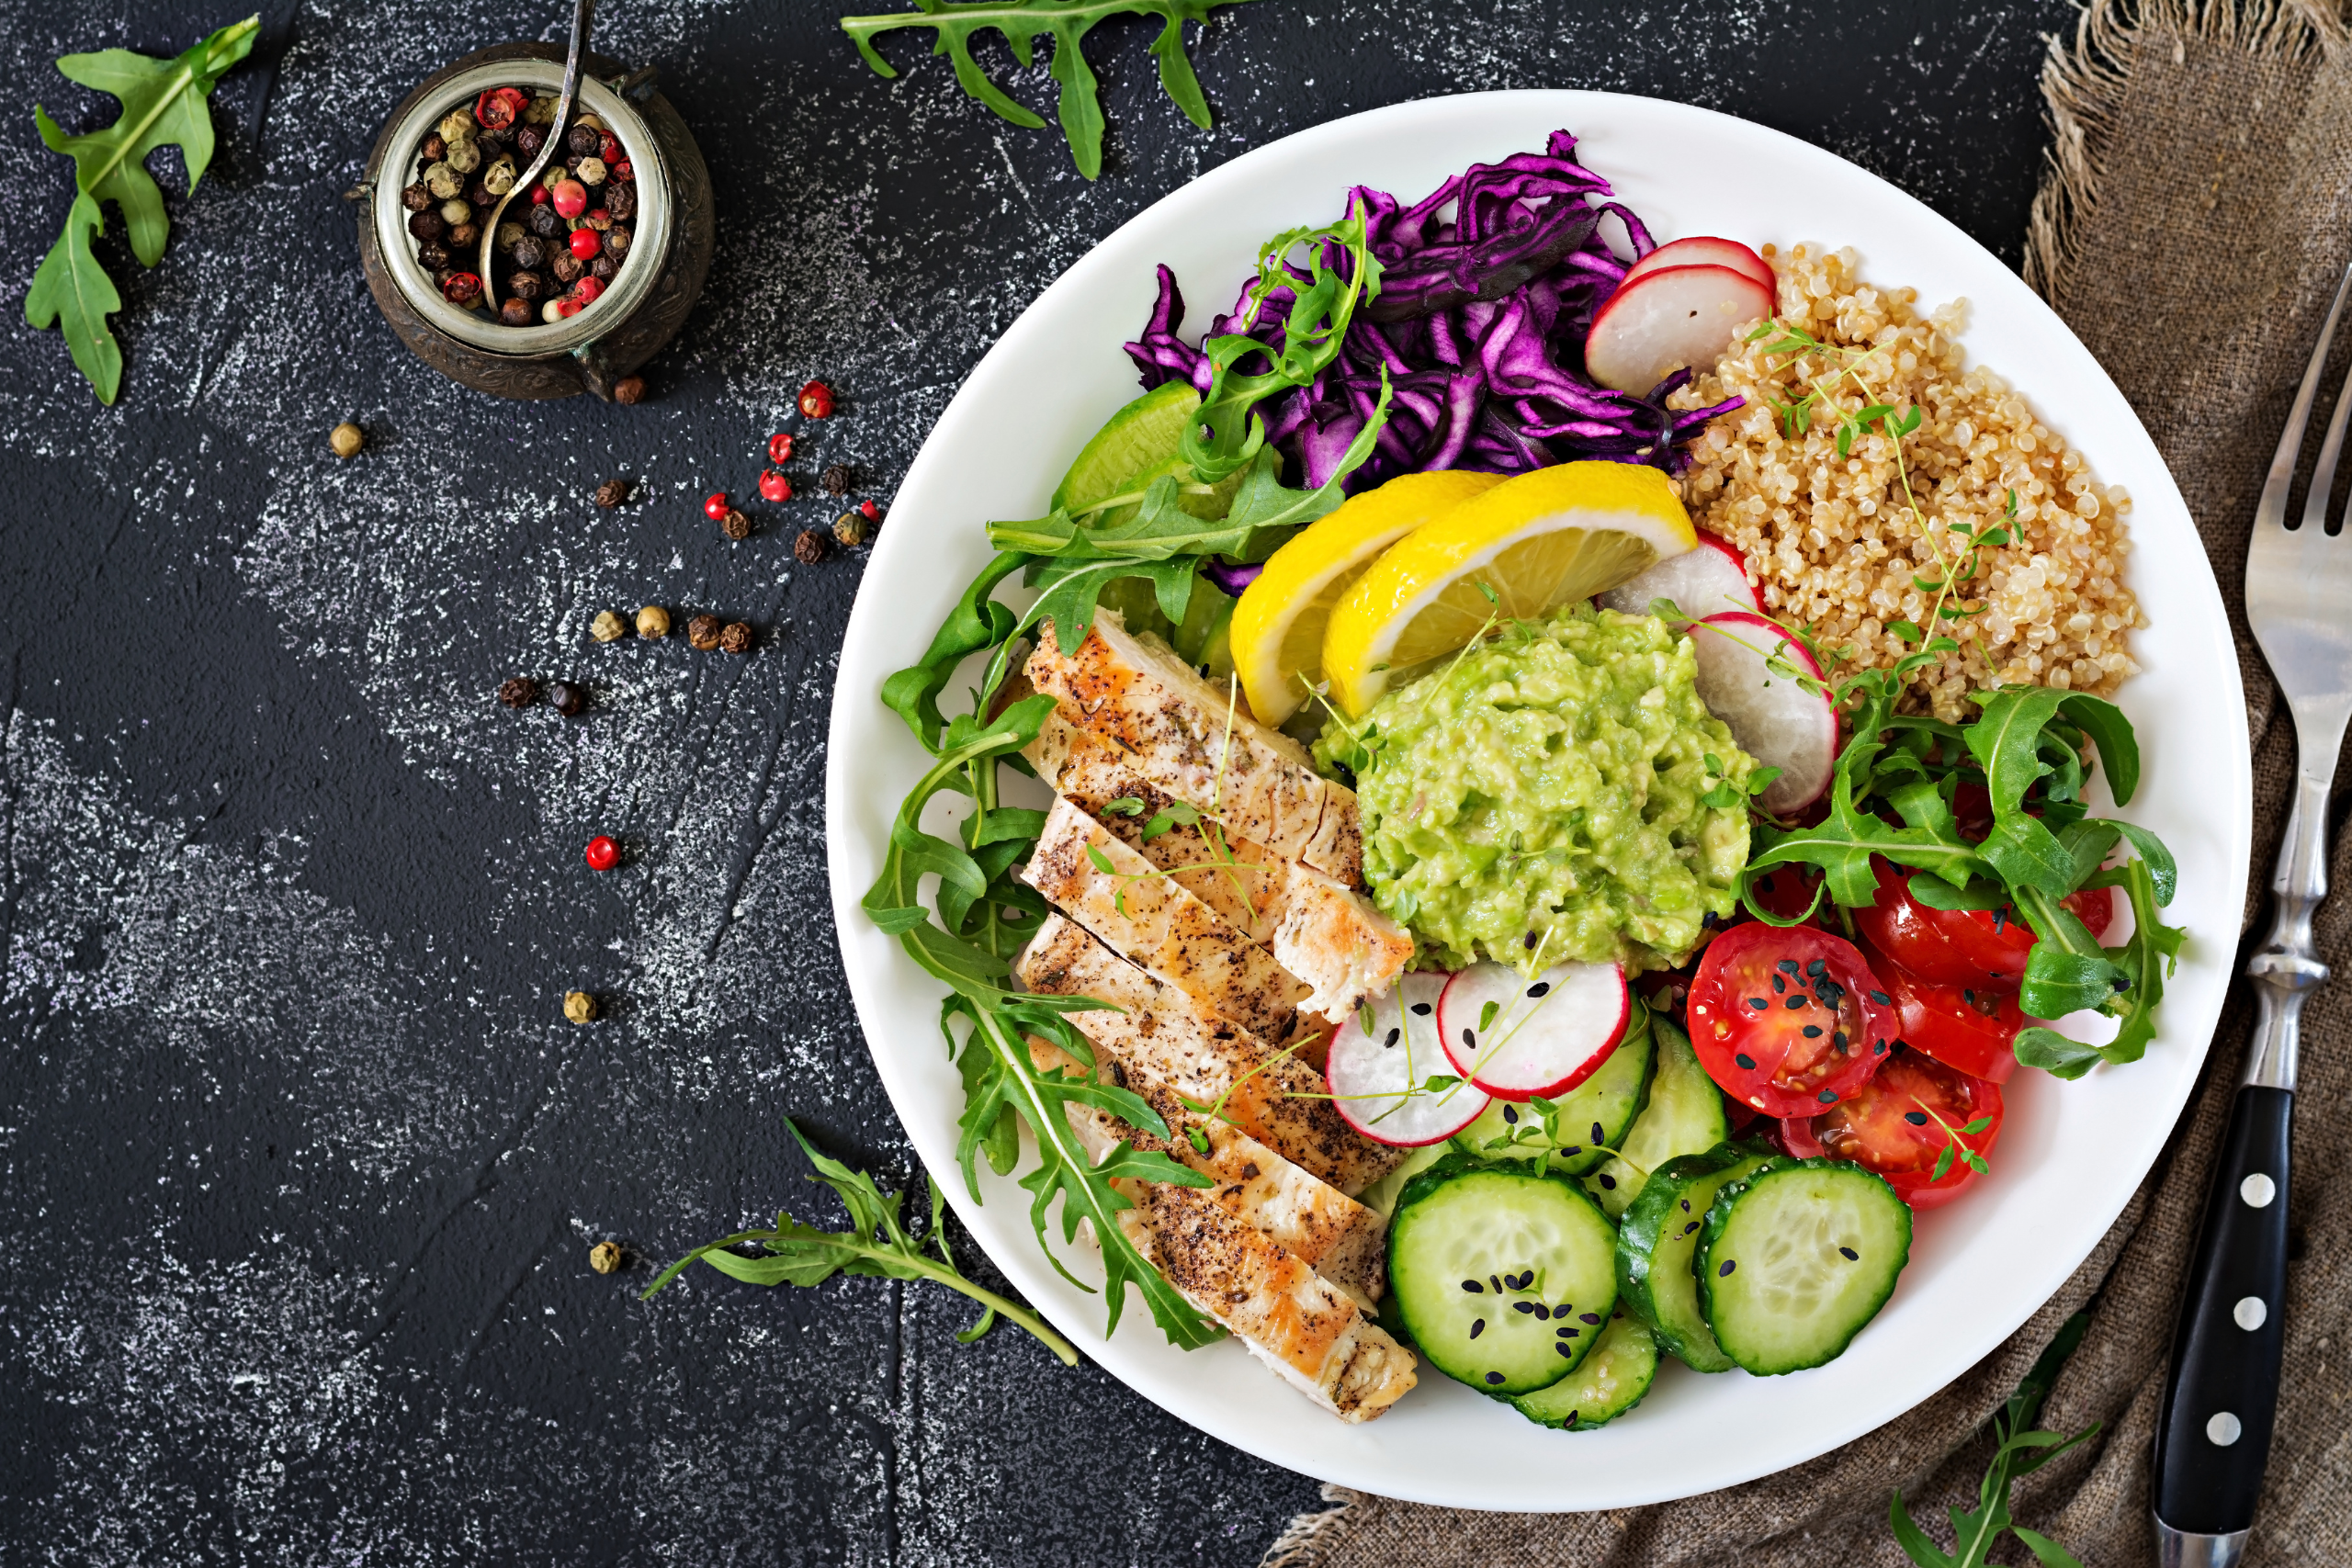 Colorful balanced meal plate with grilled chicken, quinoa, guacamole, and fresh vegetables, served on a dark background.